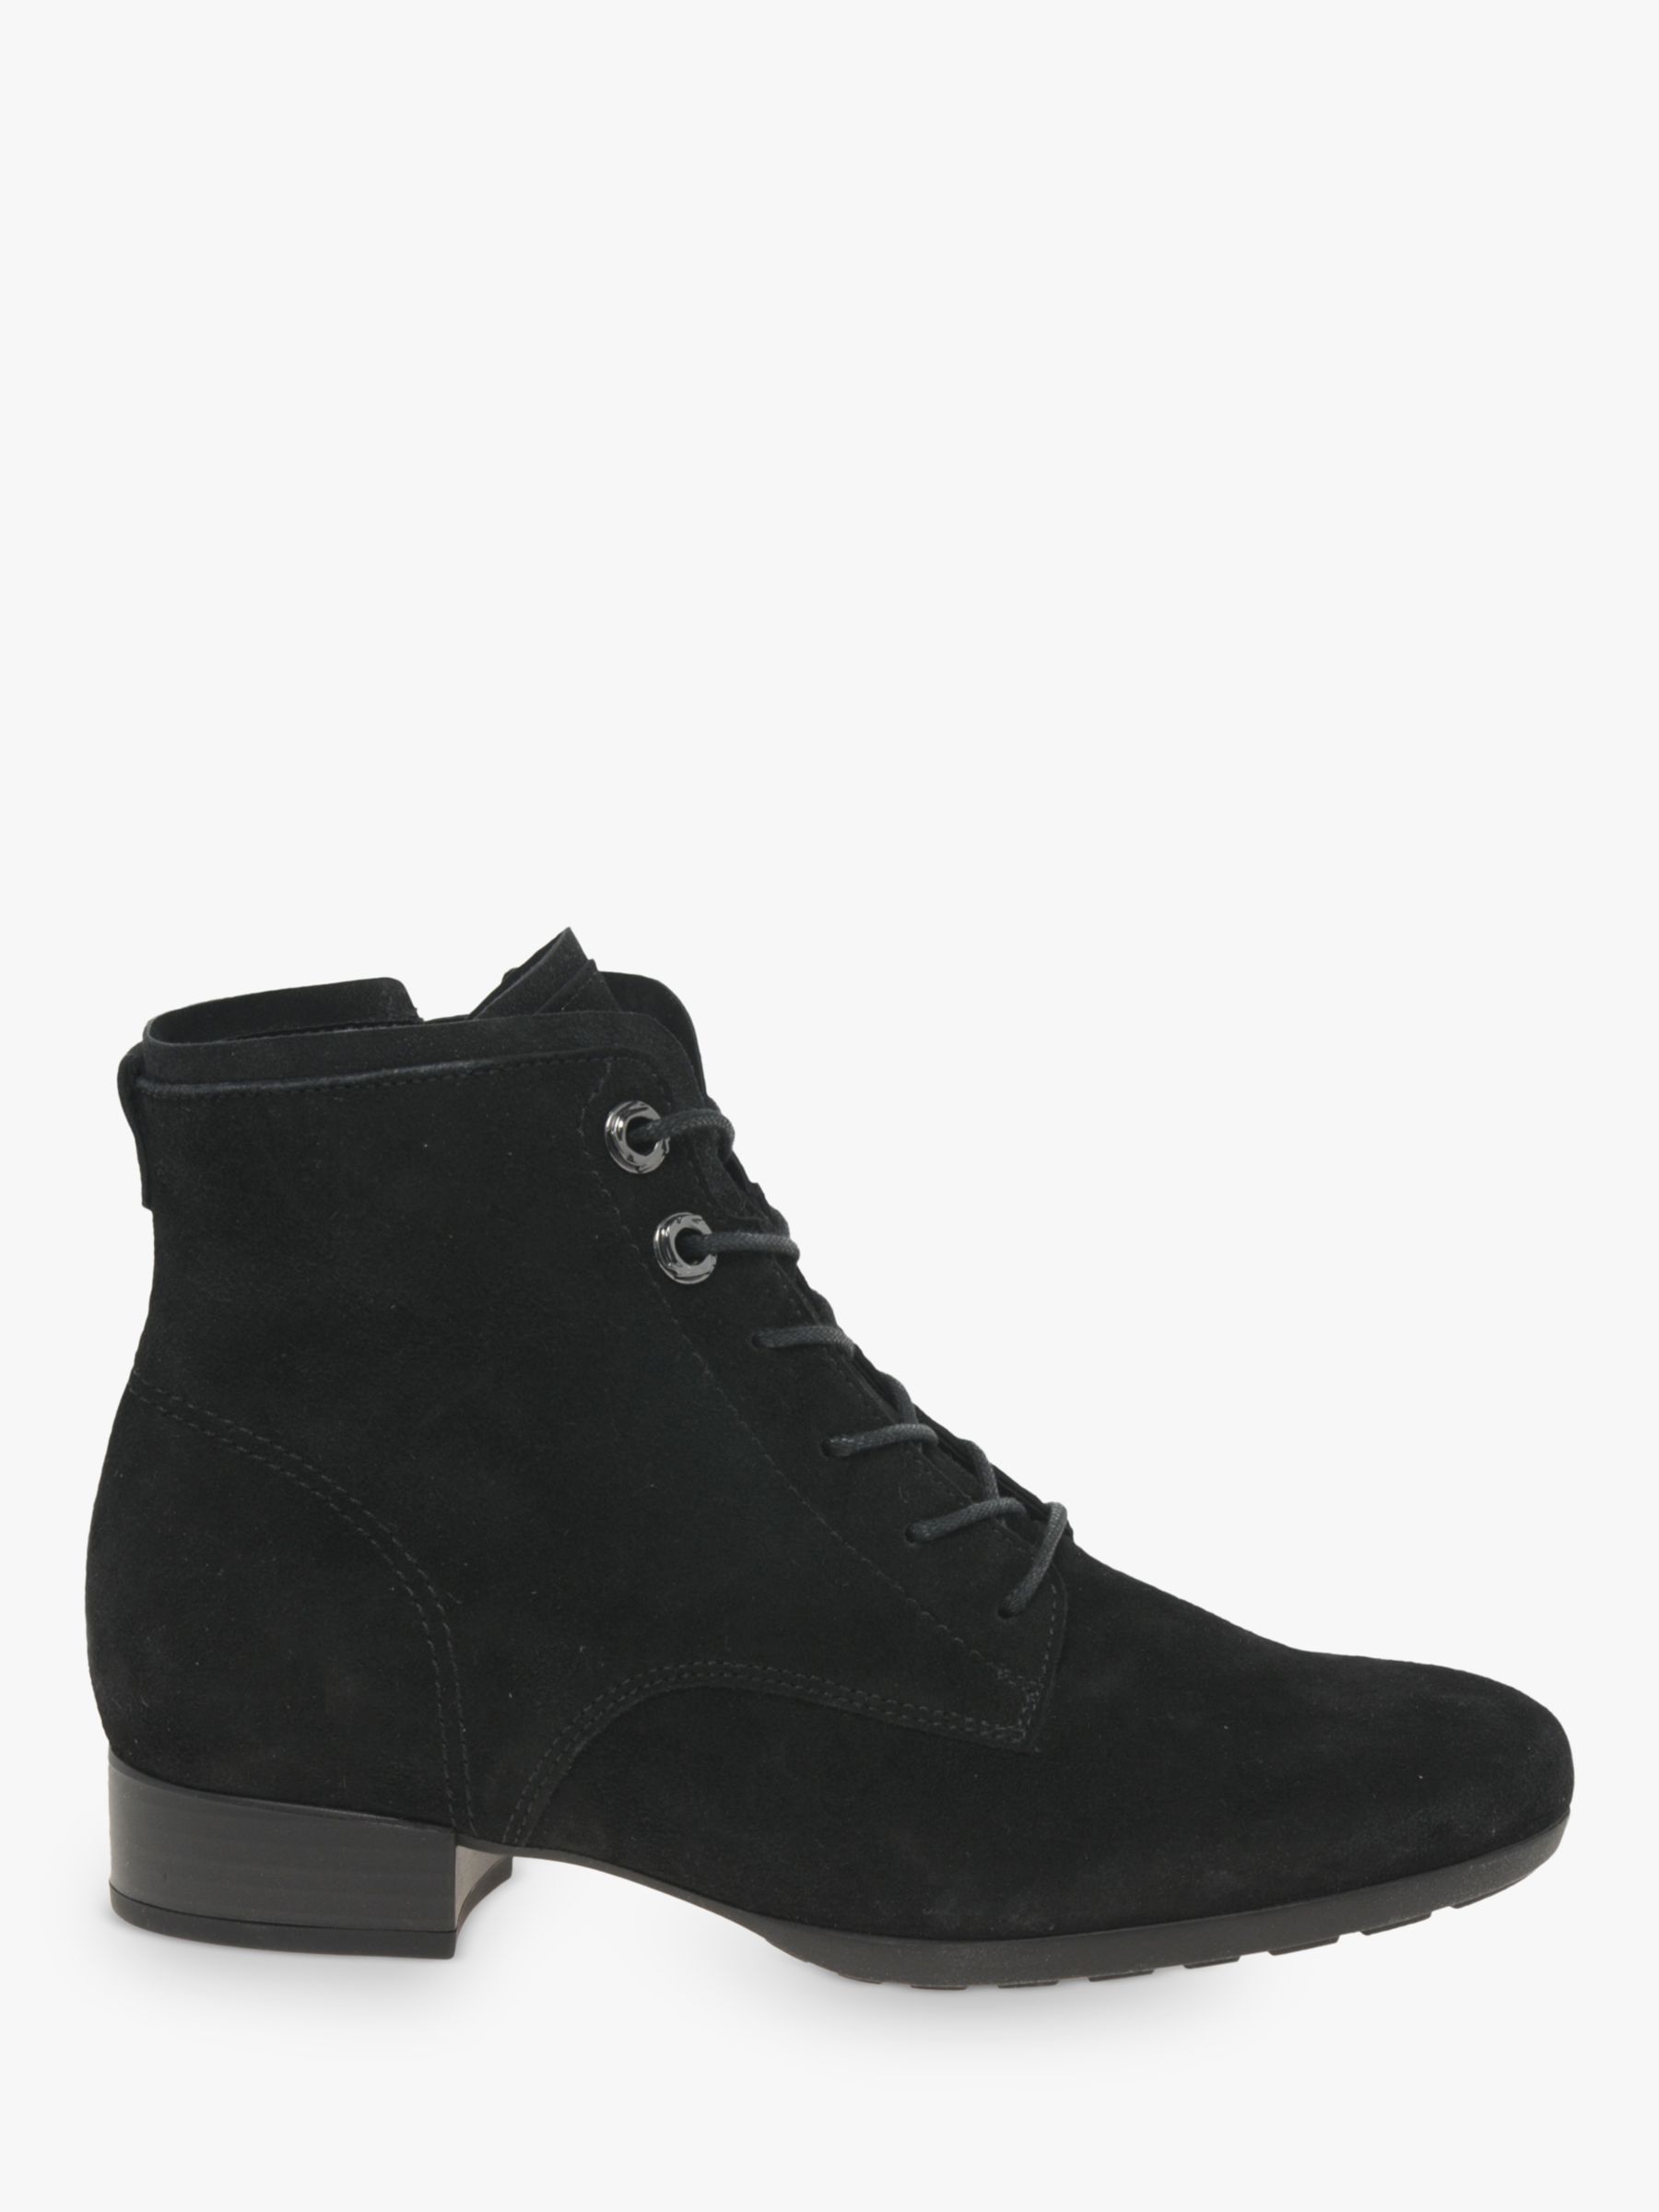 Intolerable Withdrawal eel Gabor Boat Wide Fit Suede Lace Up Ankle Boots, Black at John Lewis &  Partners